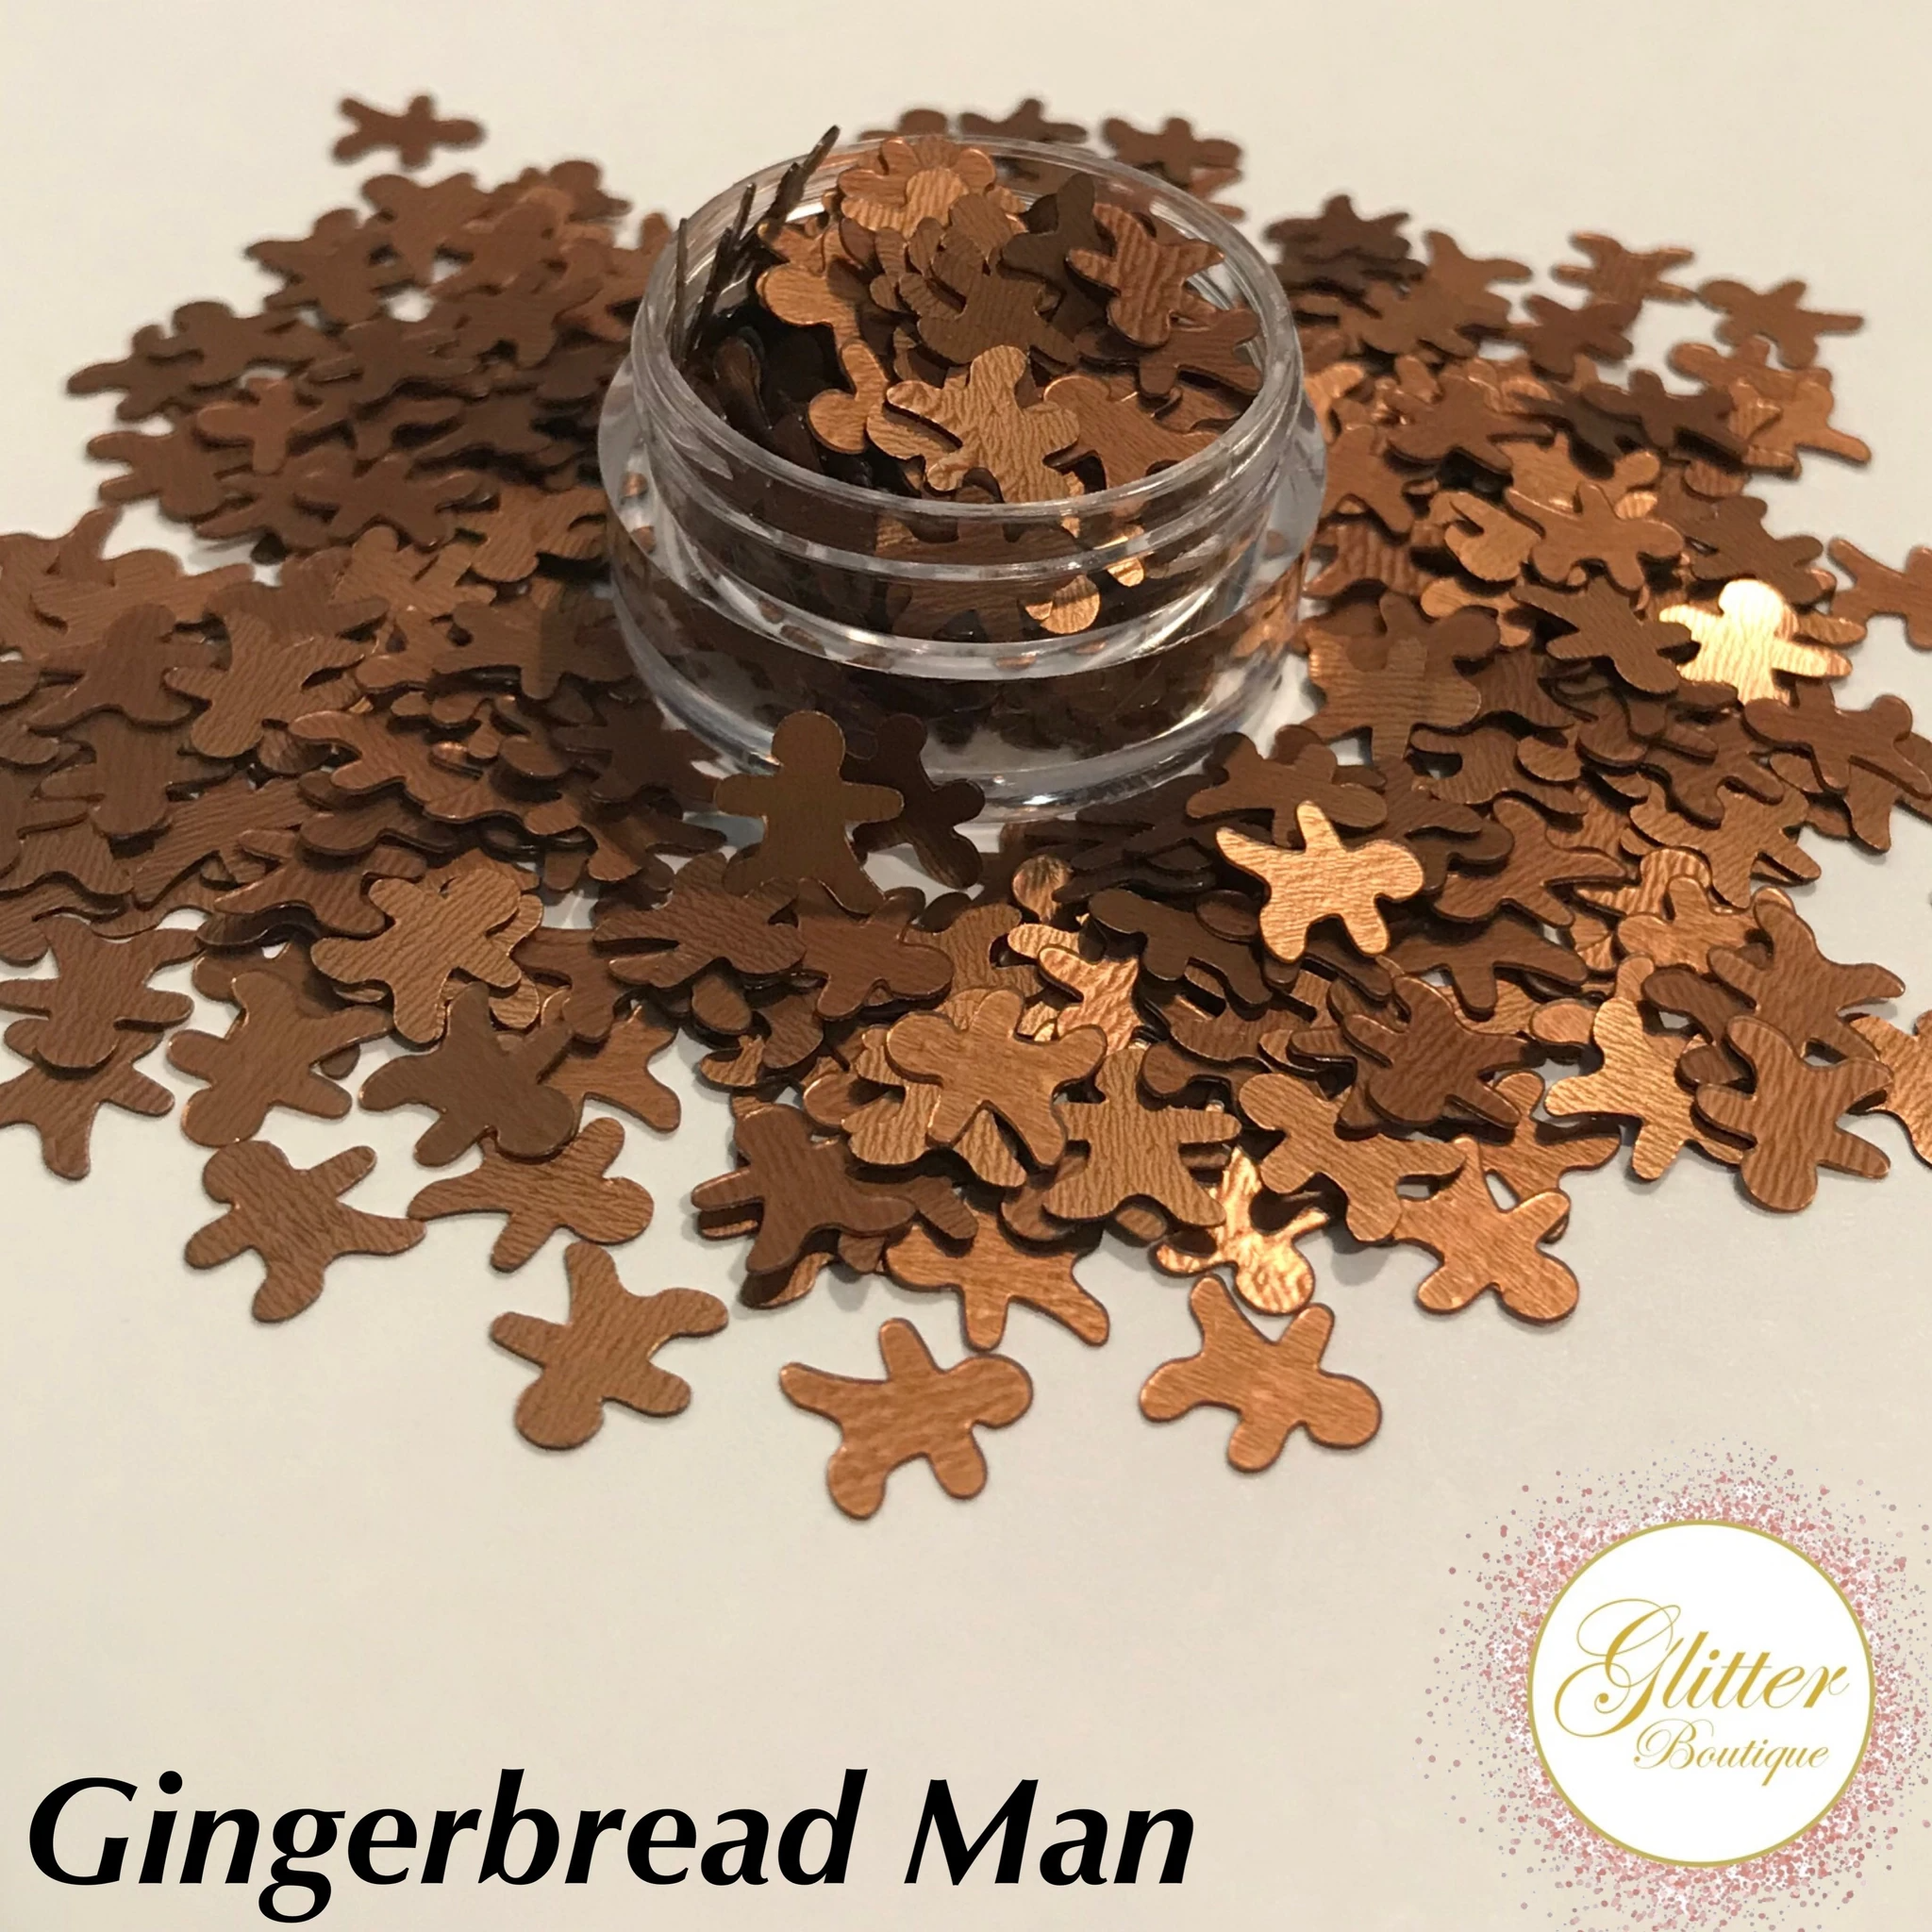 Glitter Boutique - Gingerbread Man - Creata Beauty - Professional Beauty Products